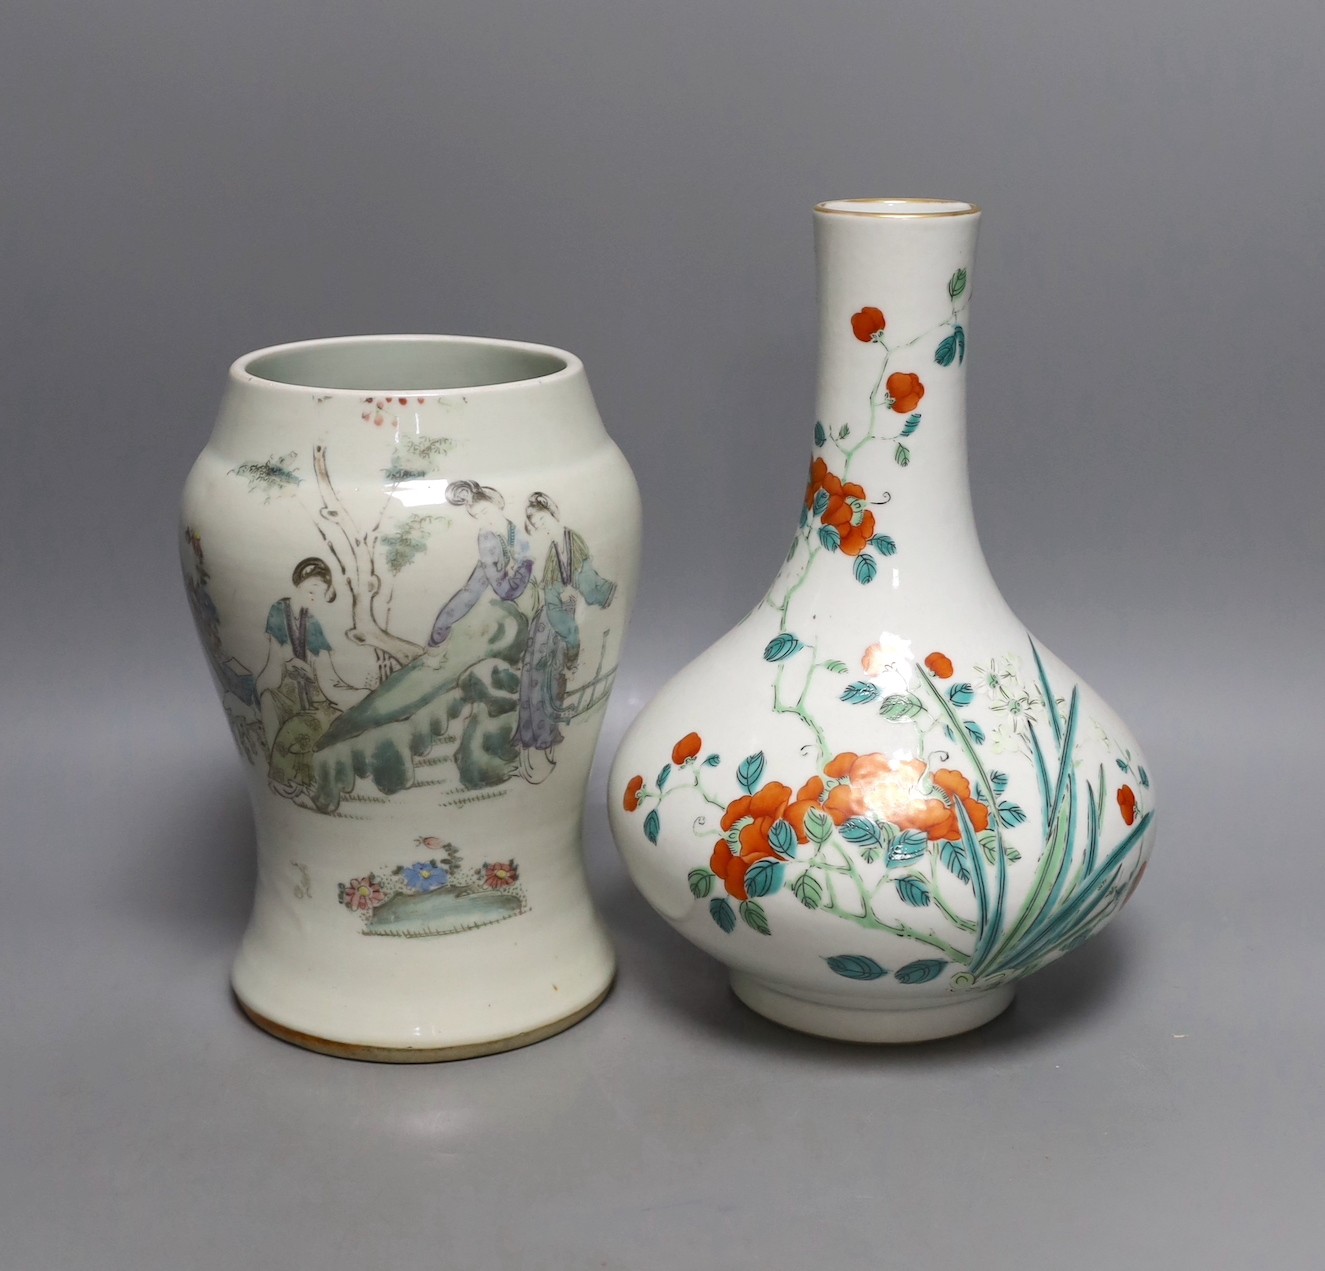 A Chinese enamelled porcelain bottle vase, 25cm high, together with a Chinese porcelain baluster jar, early 20th century, painted with figures and script